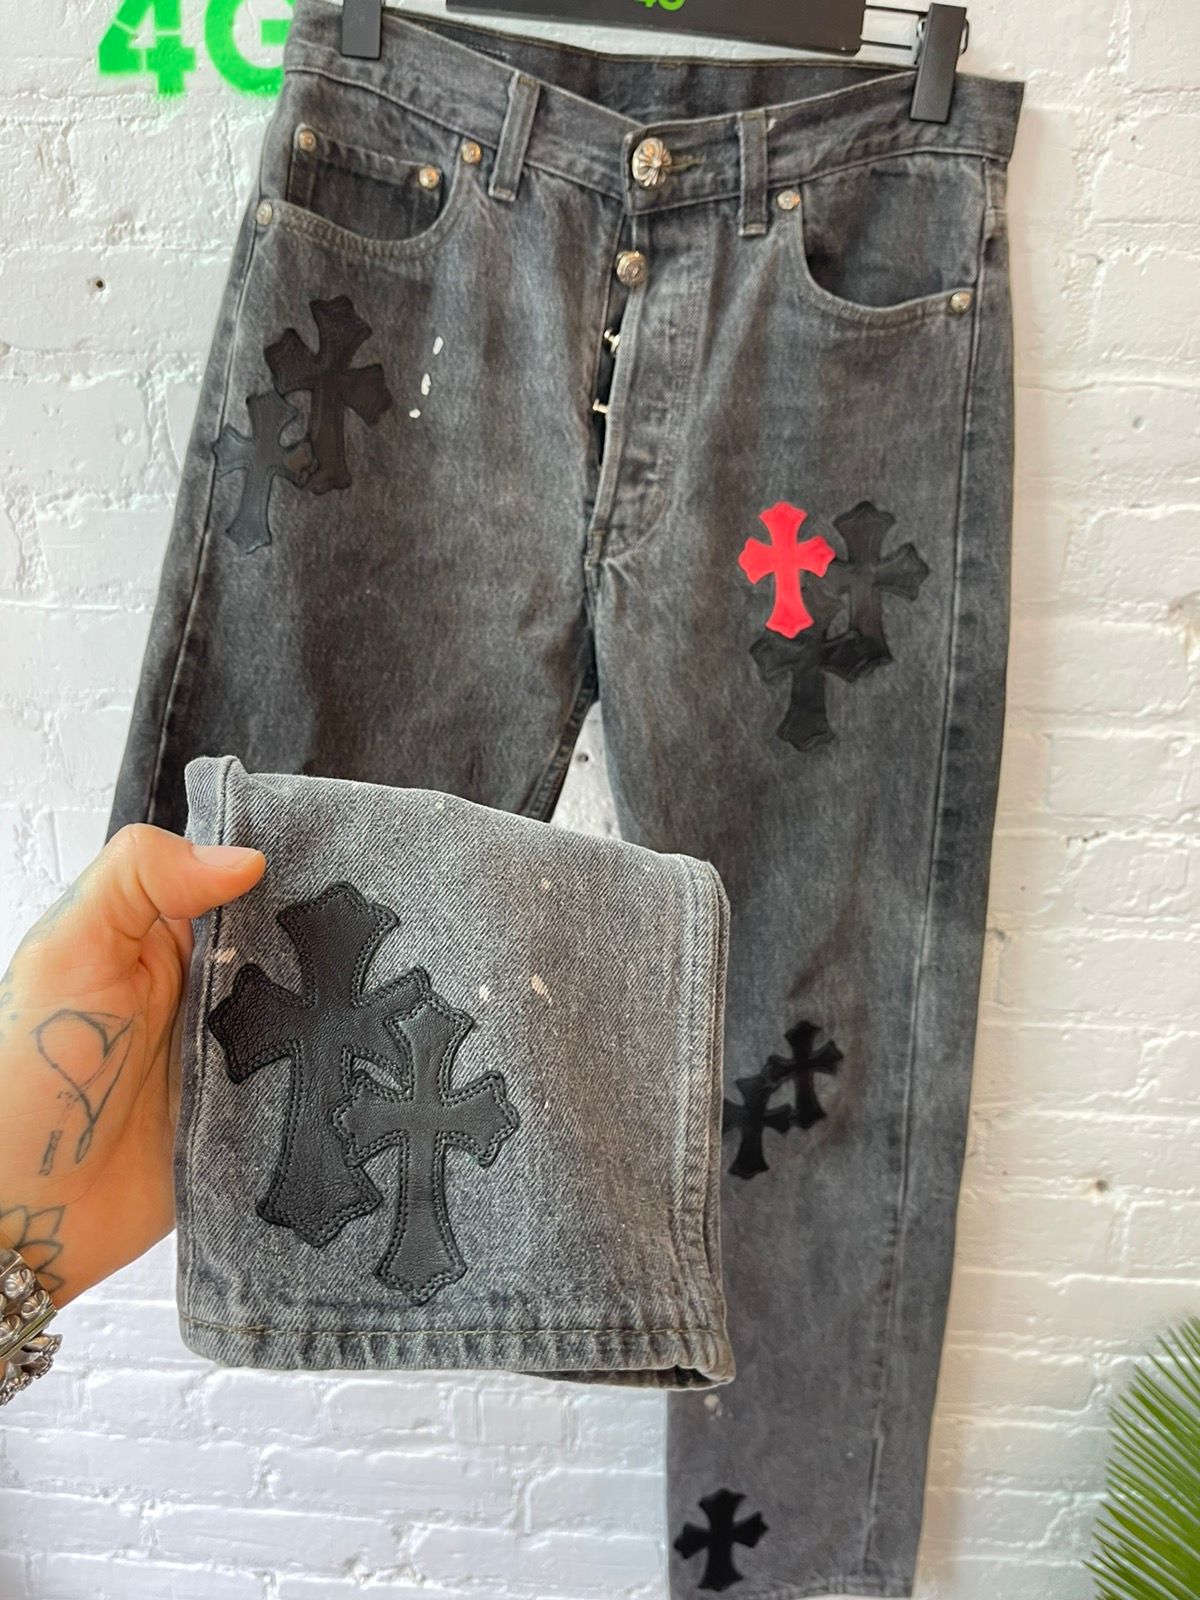 Chrome Hearts OFFSET PERSONAL CROSS PATCH JEANS